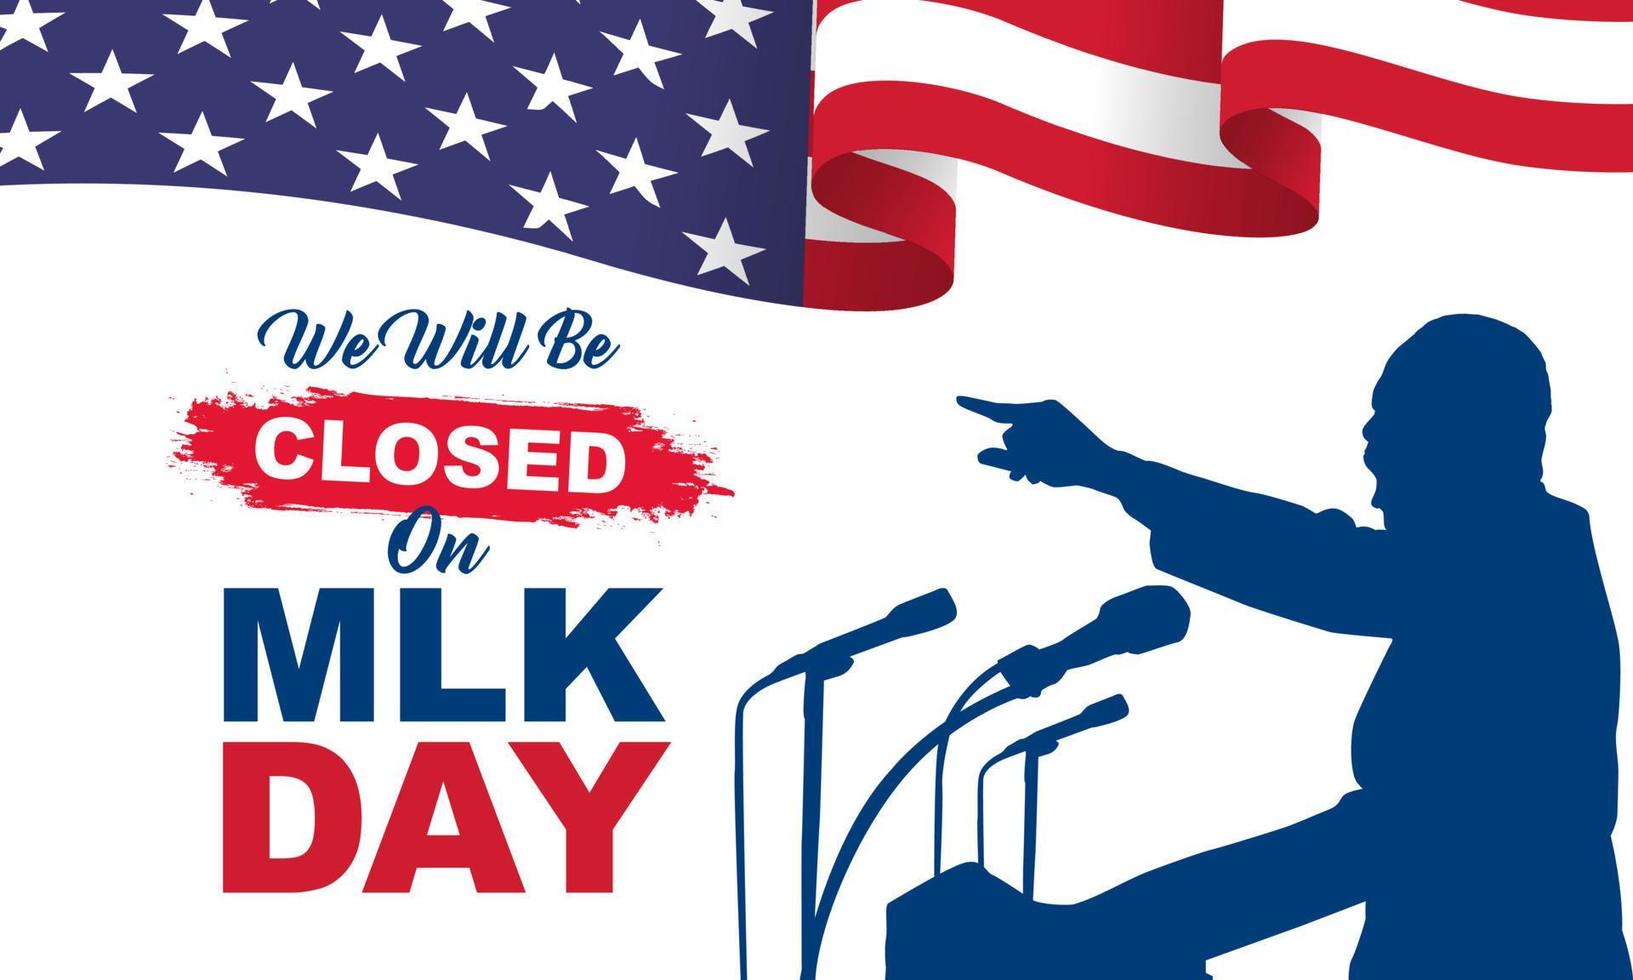 We will be closed on Monday, January 15th, in observance of Martin